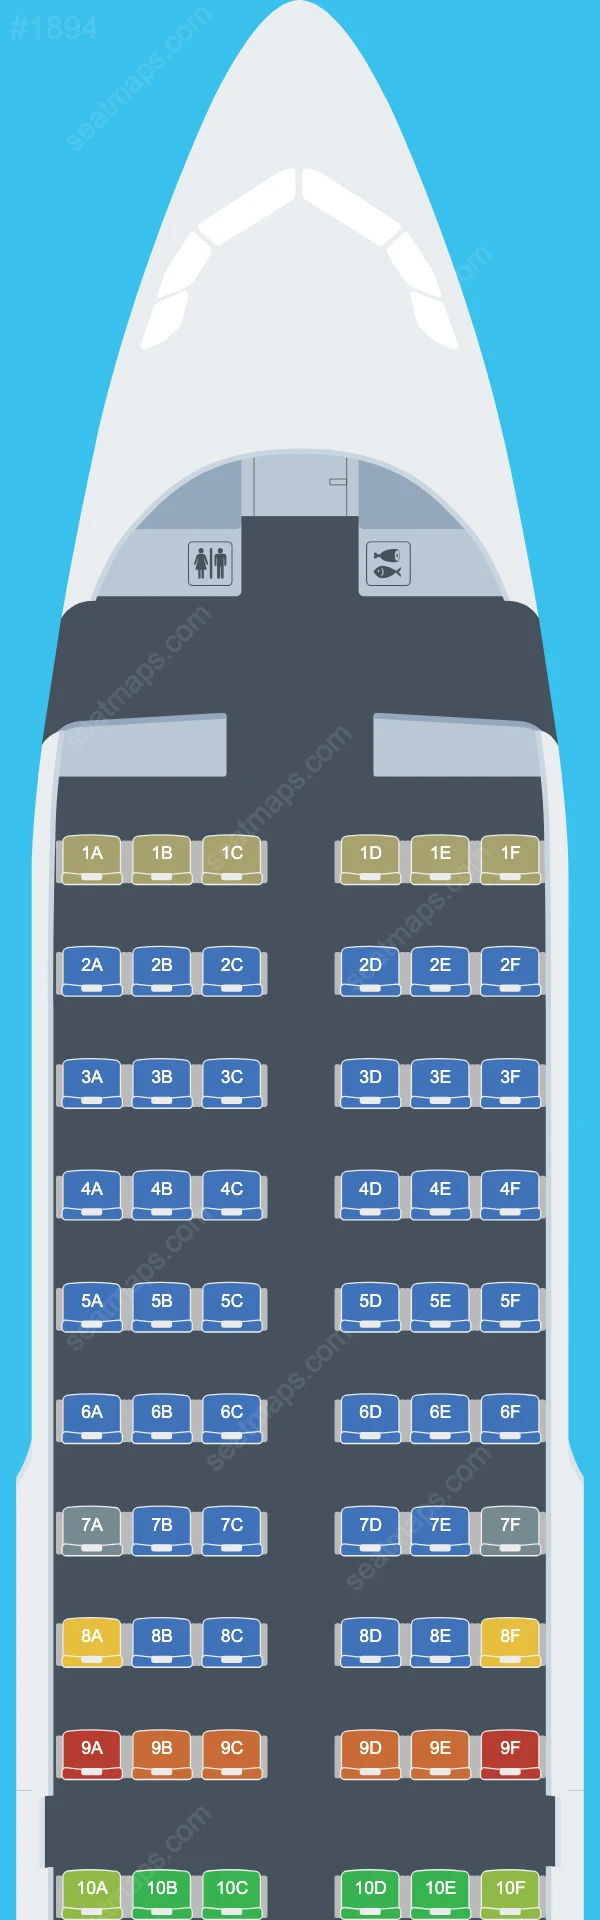 LATAM Airlines Brasil Airbus A319 Seat Maps A319-100